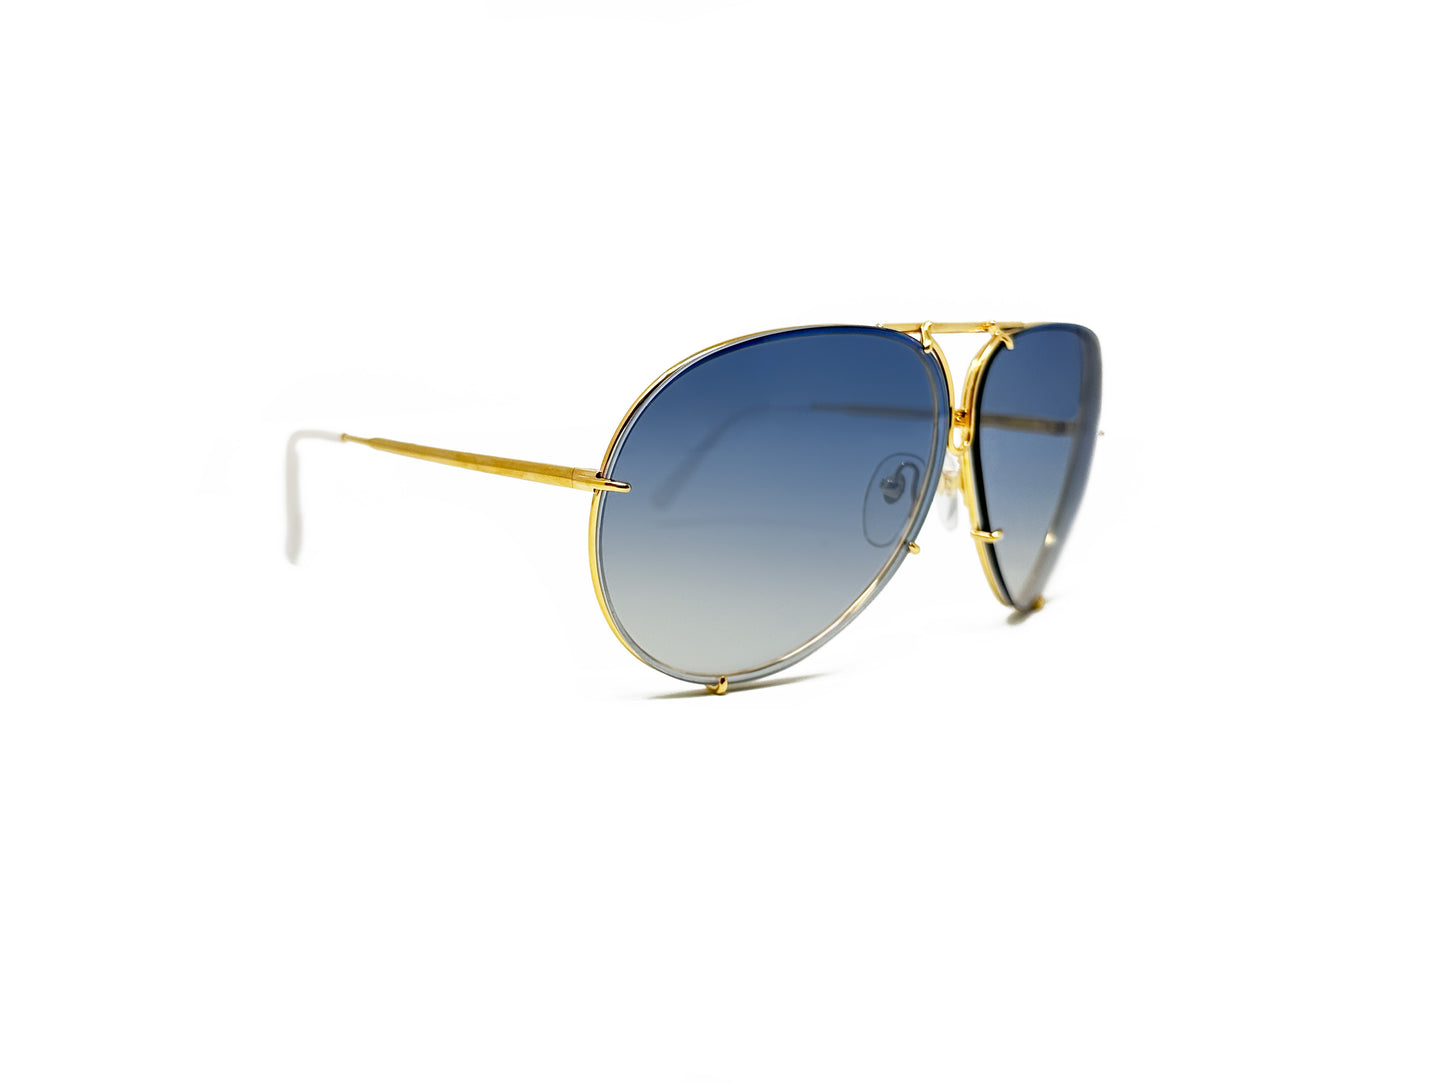 Porsche Design aviator style sunglass. Model: P8478. Color W - Gold with White temples and blue gradient lens. Side view.